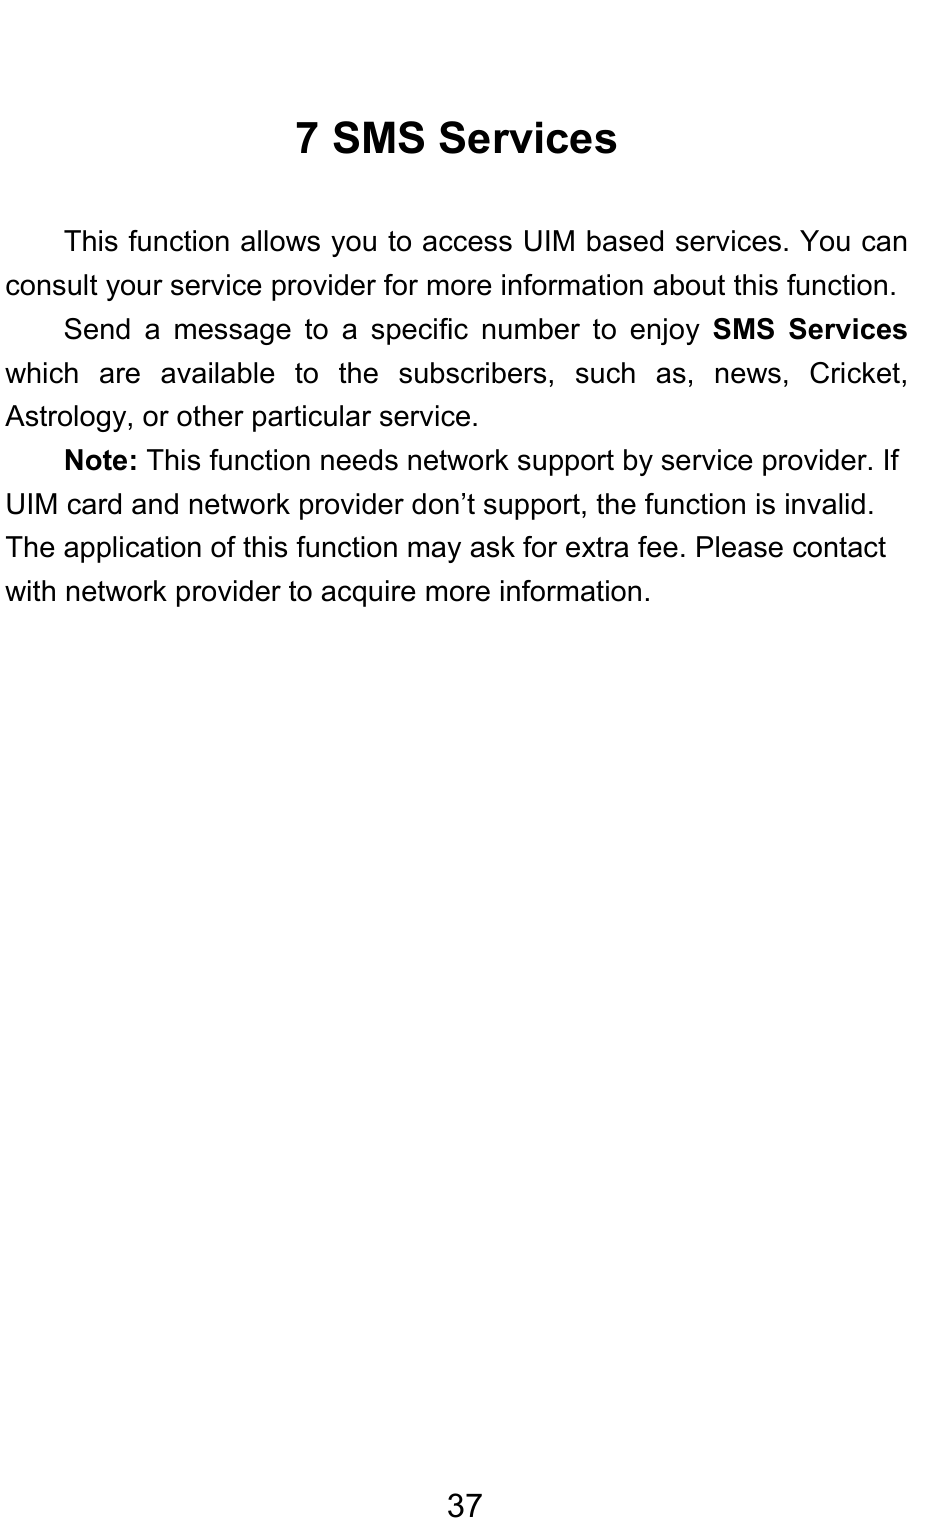                                     377 SMS Services This function allows you to access UIM based services. You can consult your service provider for more information about this function. Send a message to a specific number to enjoy SMS Services which are available to the subscribers, such as, news, Cricket, Astrology, or other particular service.   Note: This function needs network support by service provider. If UIM card and network provider don’t support, the function is invalid.   The application of this function may ask for extra fee. Please contact with network provider to acquire more information. 